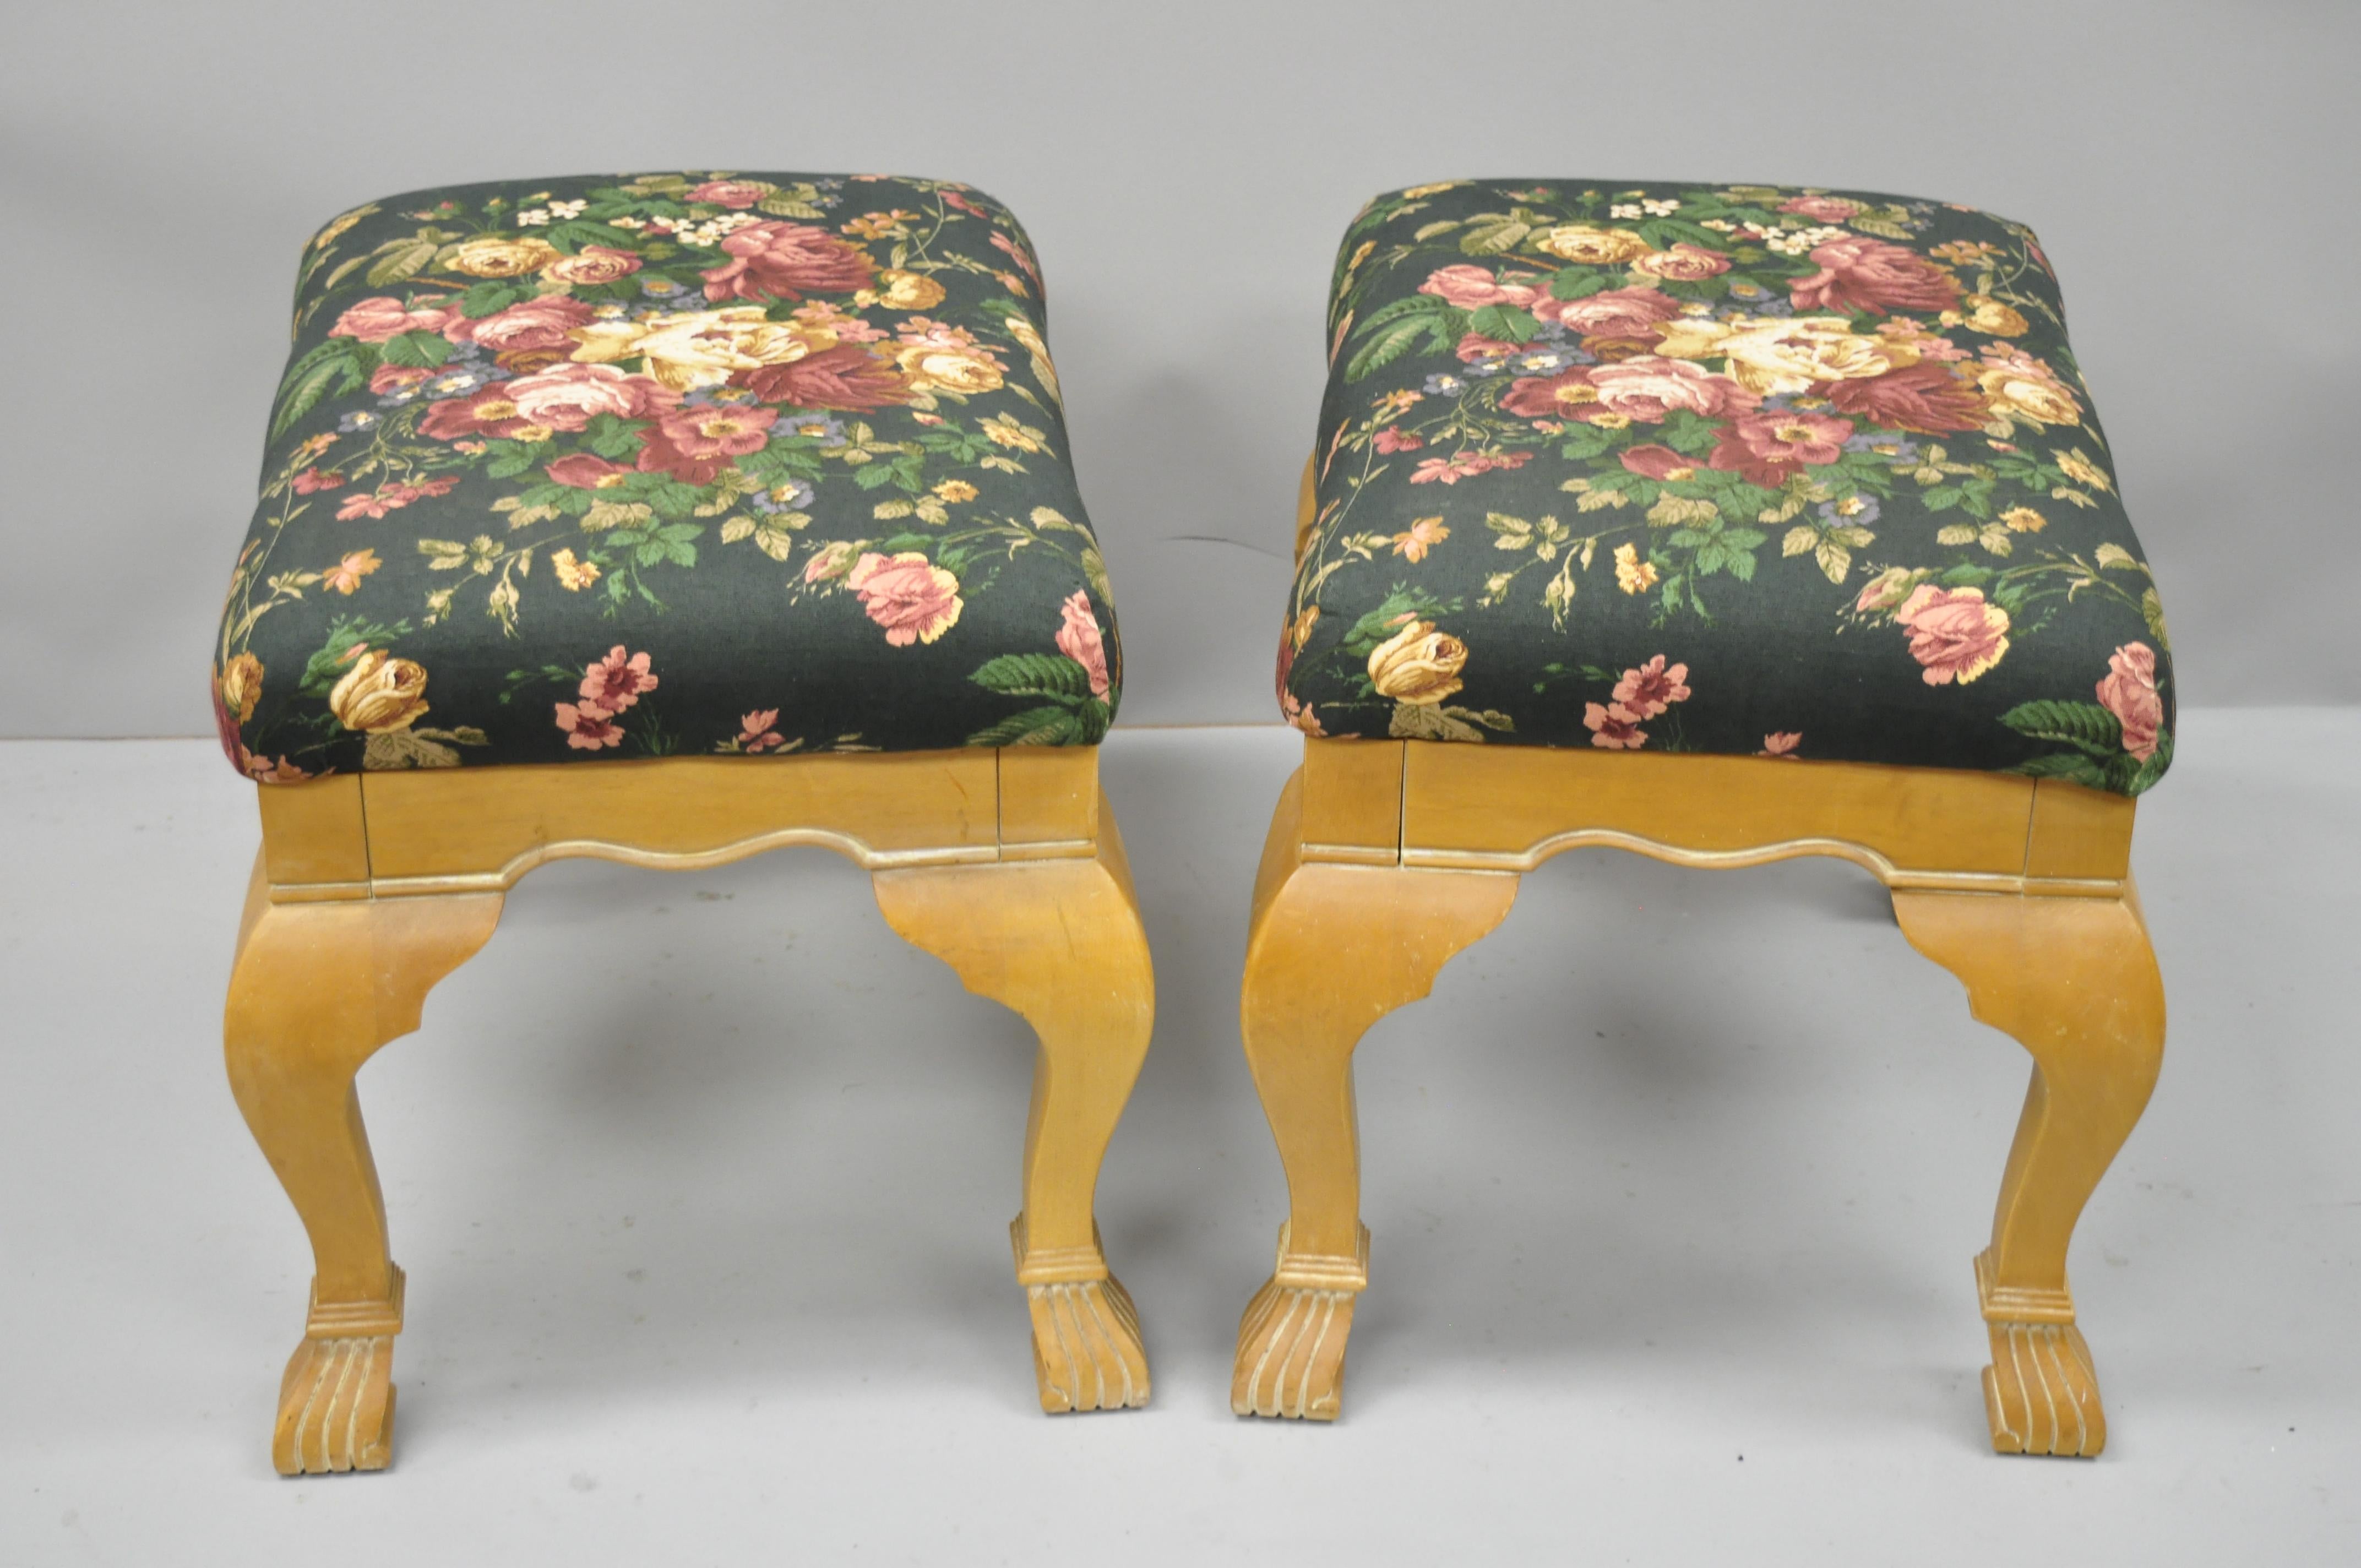 American Pair of Country French Style Cabriole Leg Hoof Foot Upholstered Stools Benches